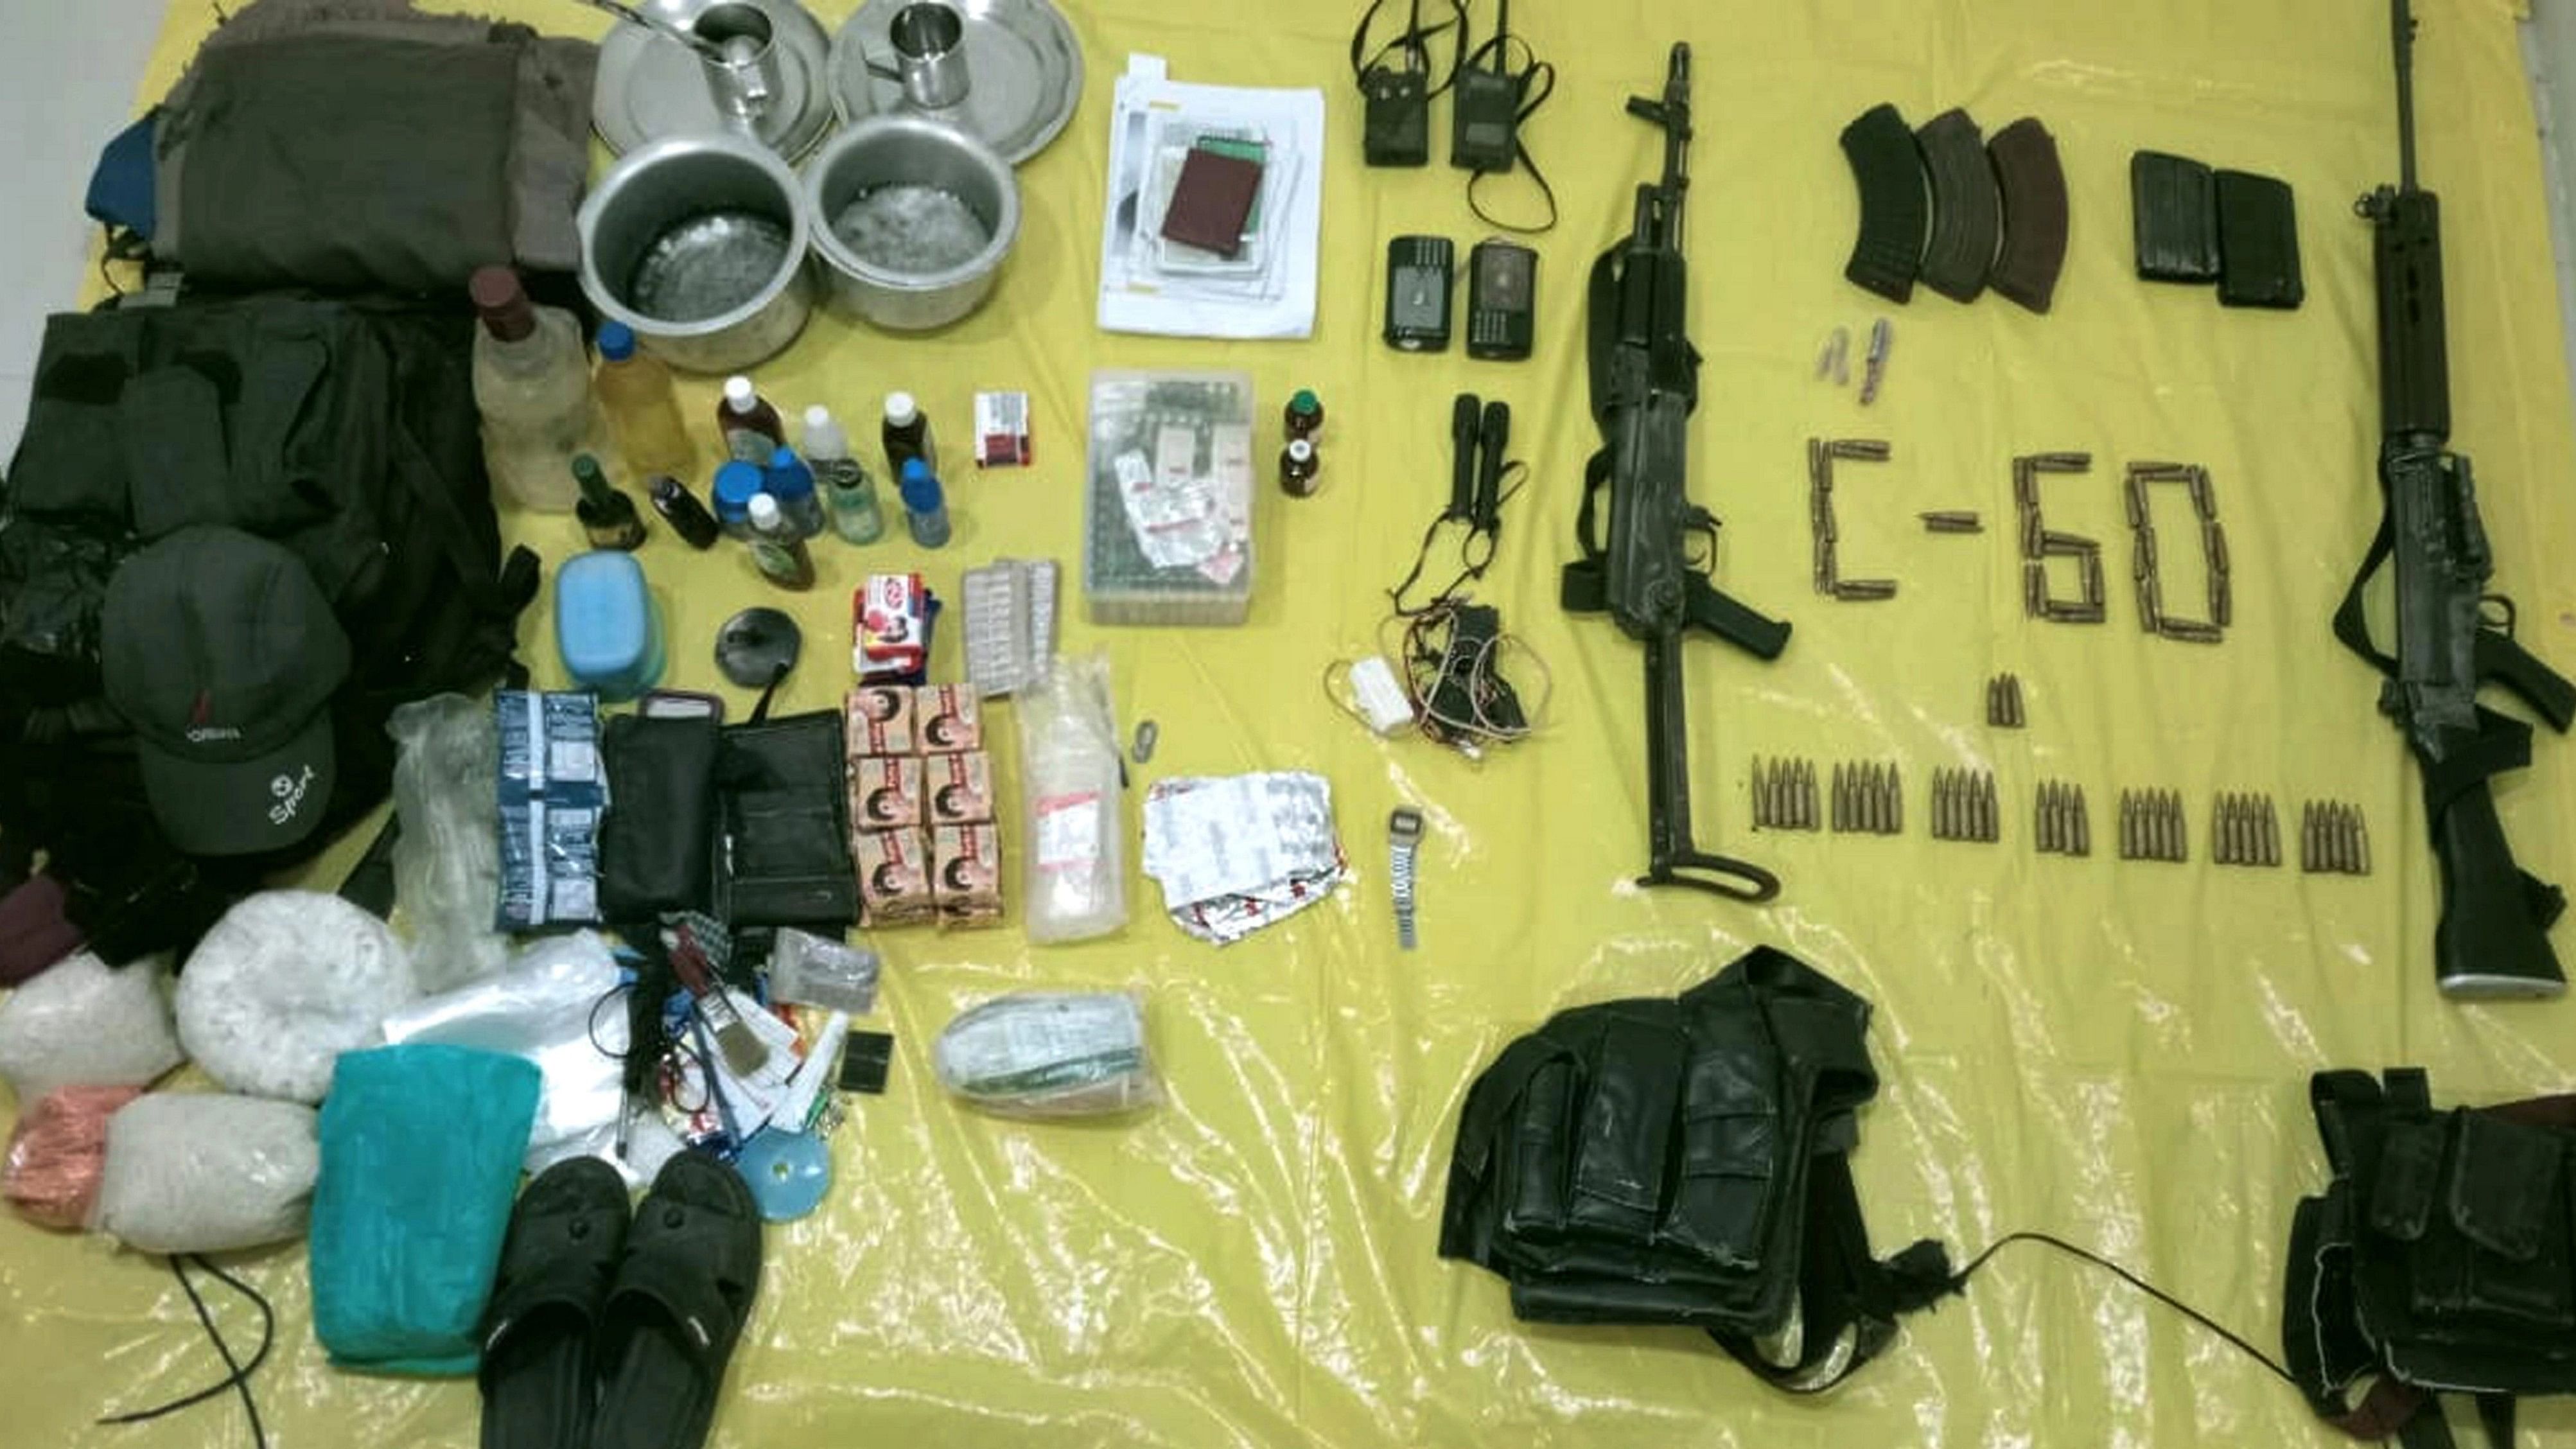 <div class="paragraphs"><p>Recoverd AK47 with SLR weapon and other materials after two Naxals were killed in an encounter with Maharashtra Police, at Bodhintola village in Gadchiroli district on Thursday.</p></div>